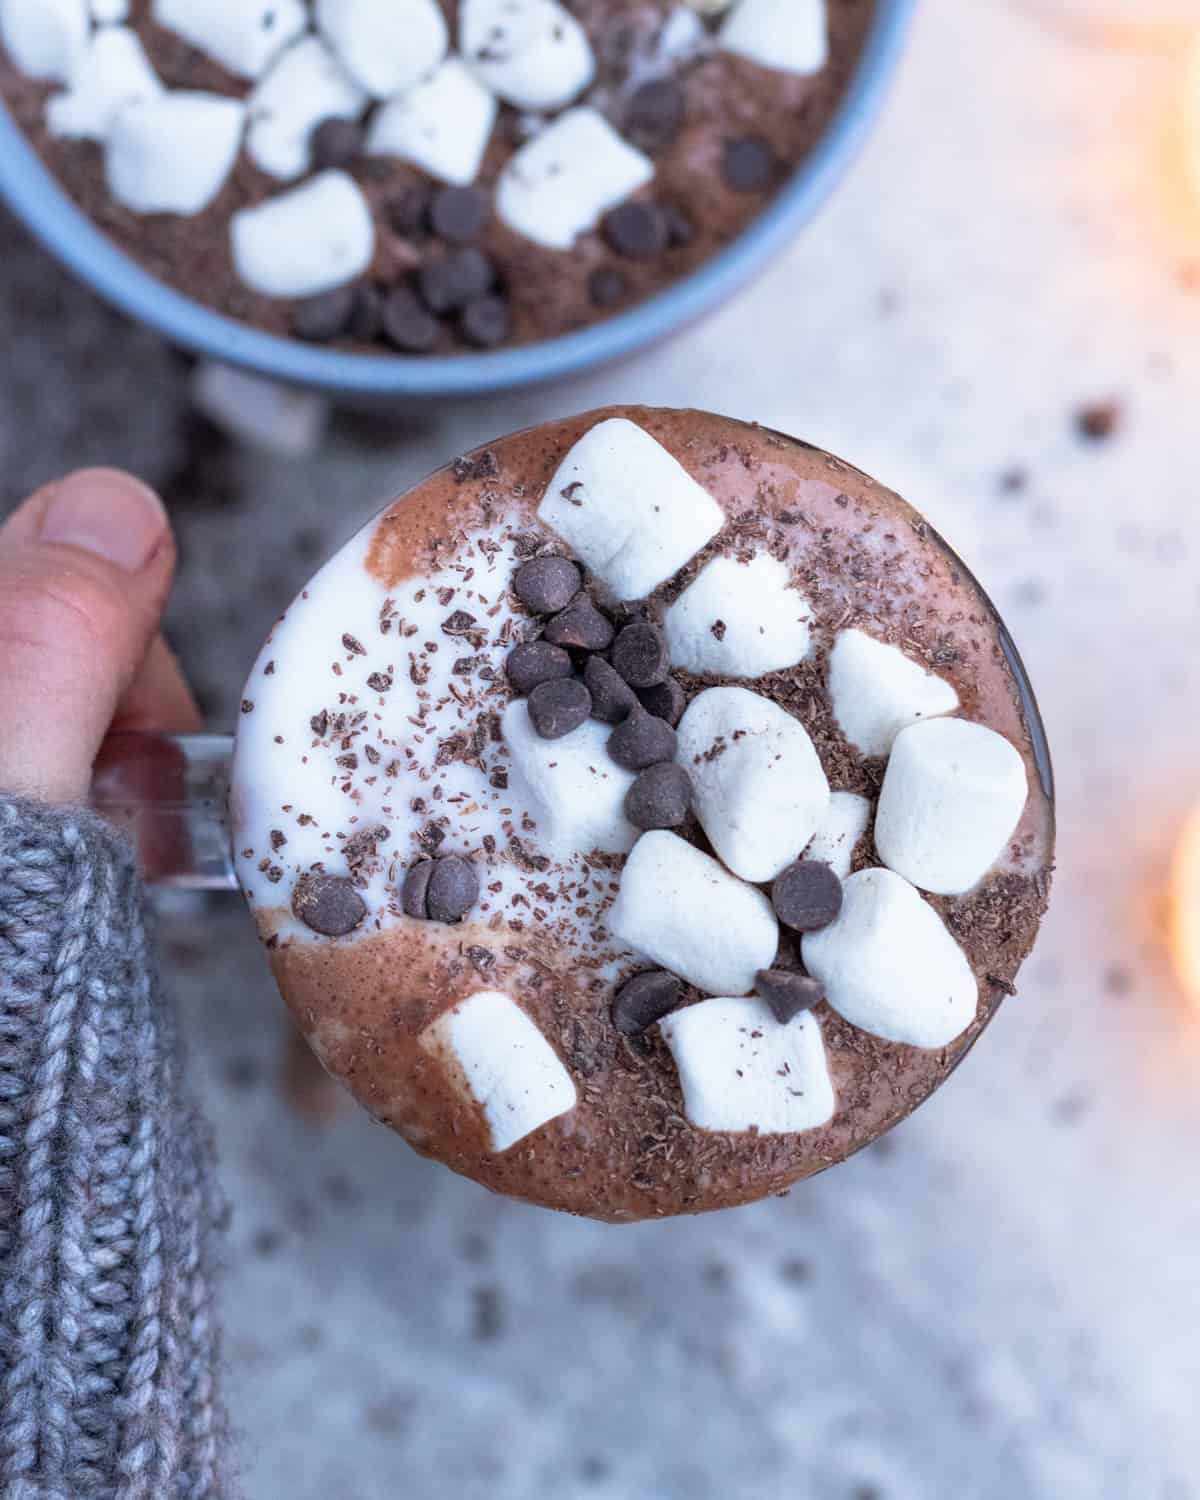 A top-down view of a mug of healthy hot chocolate, showing a generous topping of marshmallows and chocolate chips, held by hands in a snug sweater.